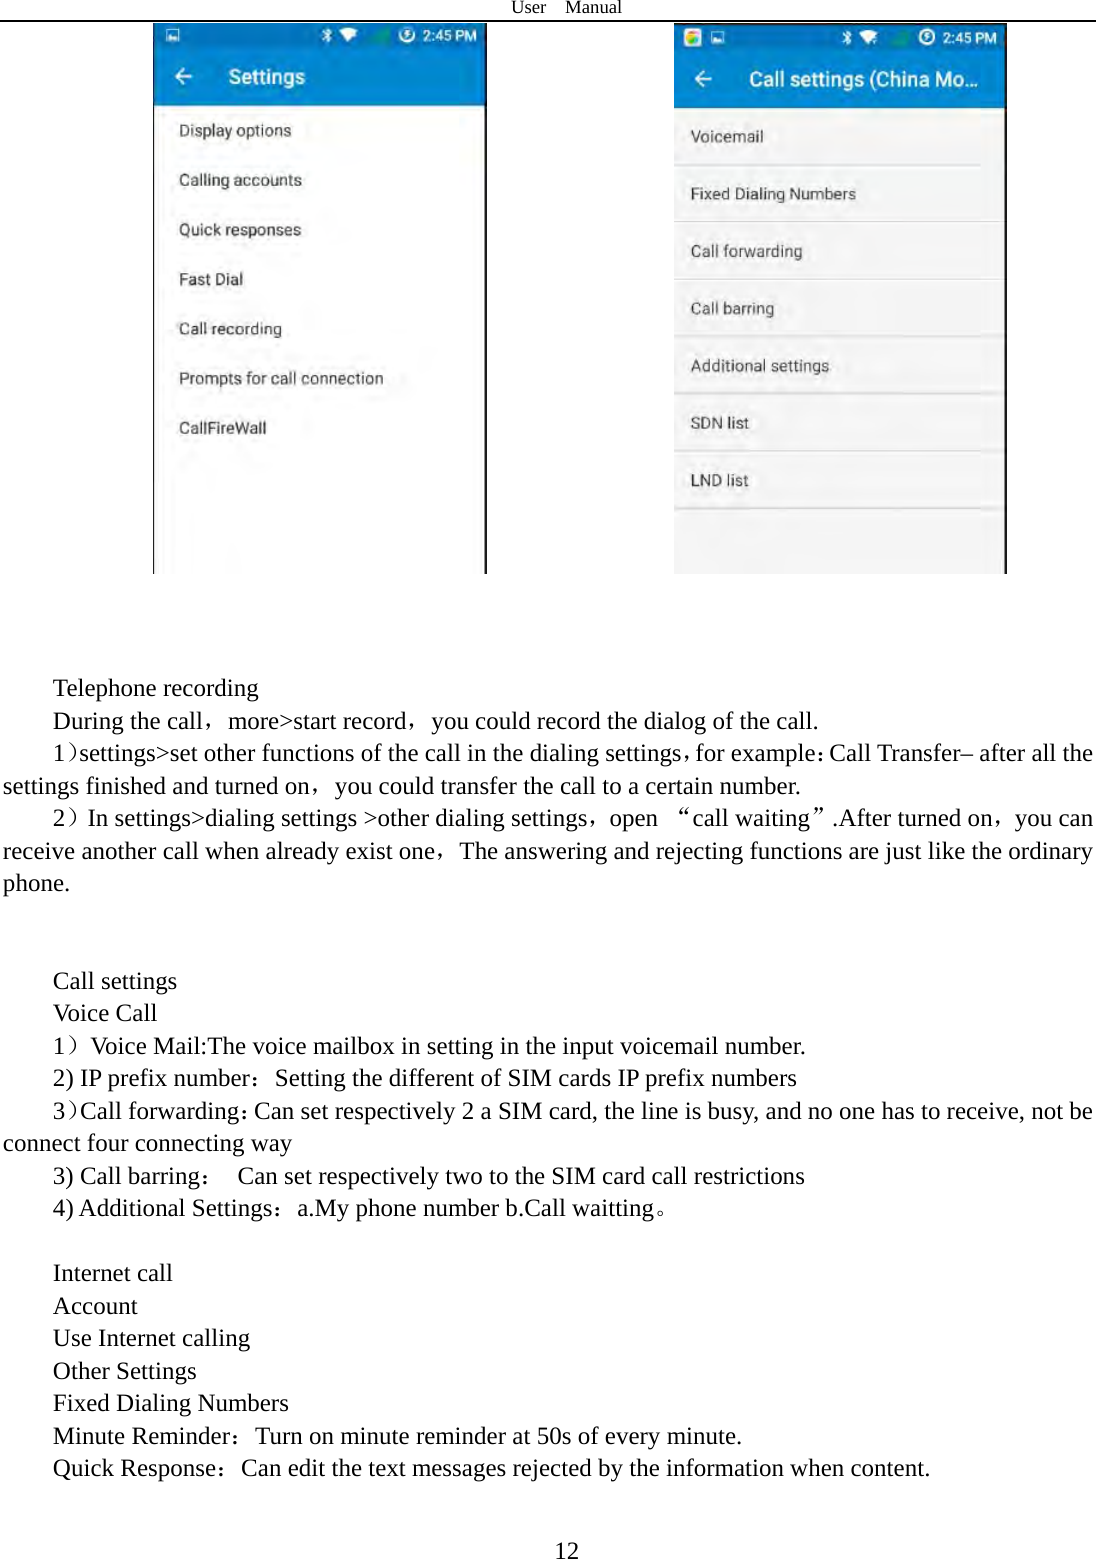 User  Manual  12                             Telephone recording During the call，more&gt;start record，you could record the dialog of the call. 1）settings&gt;set other functions of the call in the dialing settings，for example：Call Transfer– after all the settings finished and turned on，you could transfer the call to a certain number. 2）In settings&gt;dialing settings &gt;other dialing settings，open “call waiting”.After turned on，you can receive another call when already exist one，The answering and rejecting functions are just like the ordinary phone.     Call settings Voice Call   1）Voice Mail:The voice mailbox in setting in the input voicemail number.   2) IP prefix number：Setting the different of SIM cards IP prefix numbers   3）Call forwarding：Can set respectively 2 a SIM card, the line is busy, and no one has to receive, not be connect four connecting way 3) Call barring：  Can set respectively two to the SIM card call restrictions 4) Additional Settings：a.My phone number b.Call waitting。   Internet call   Account Use Internet calling Other Settings    Fixed Dialing Numbers Minute Reminder：Turn on minute reminder at 50s of every minute. Quick Response：Can edit the text messages rejected by the information when content.  